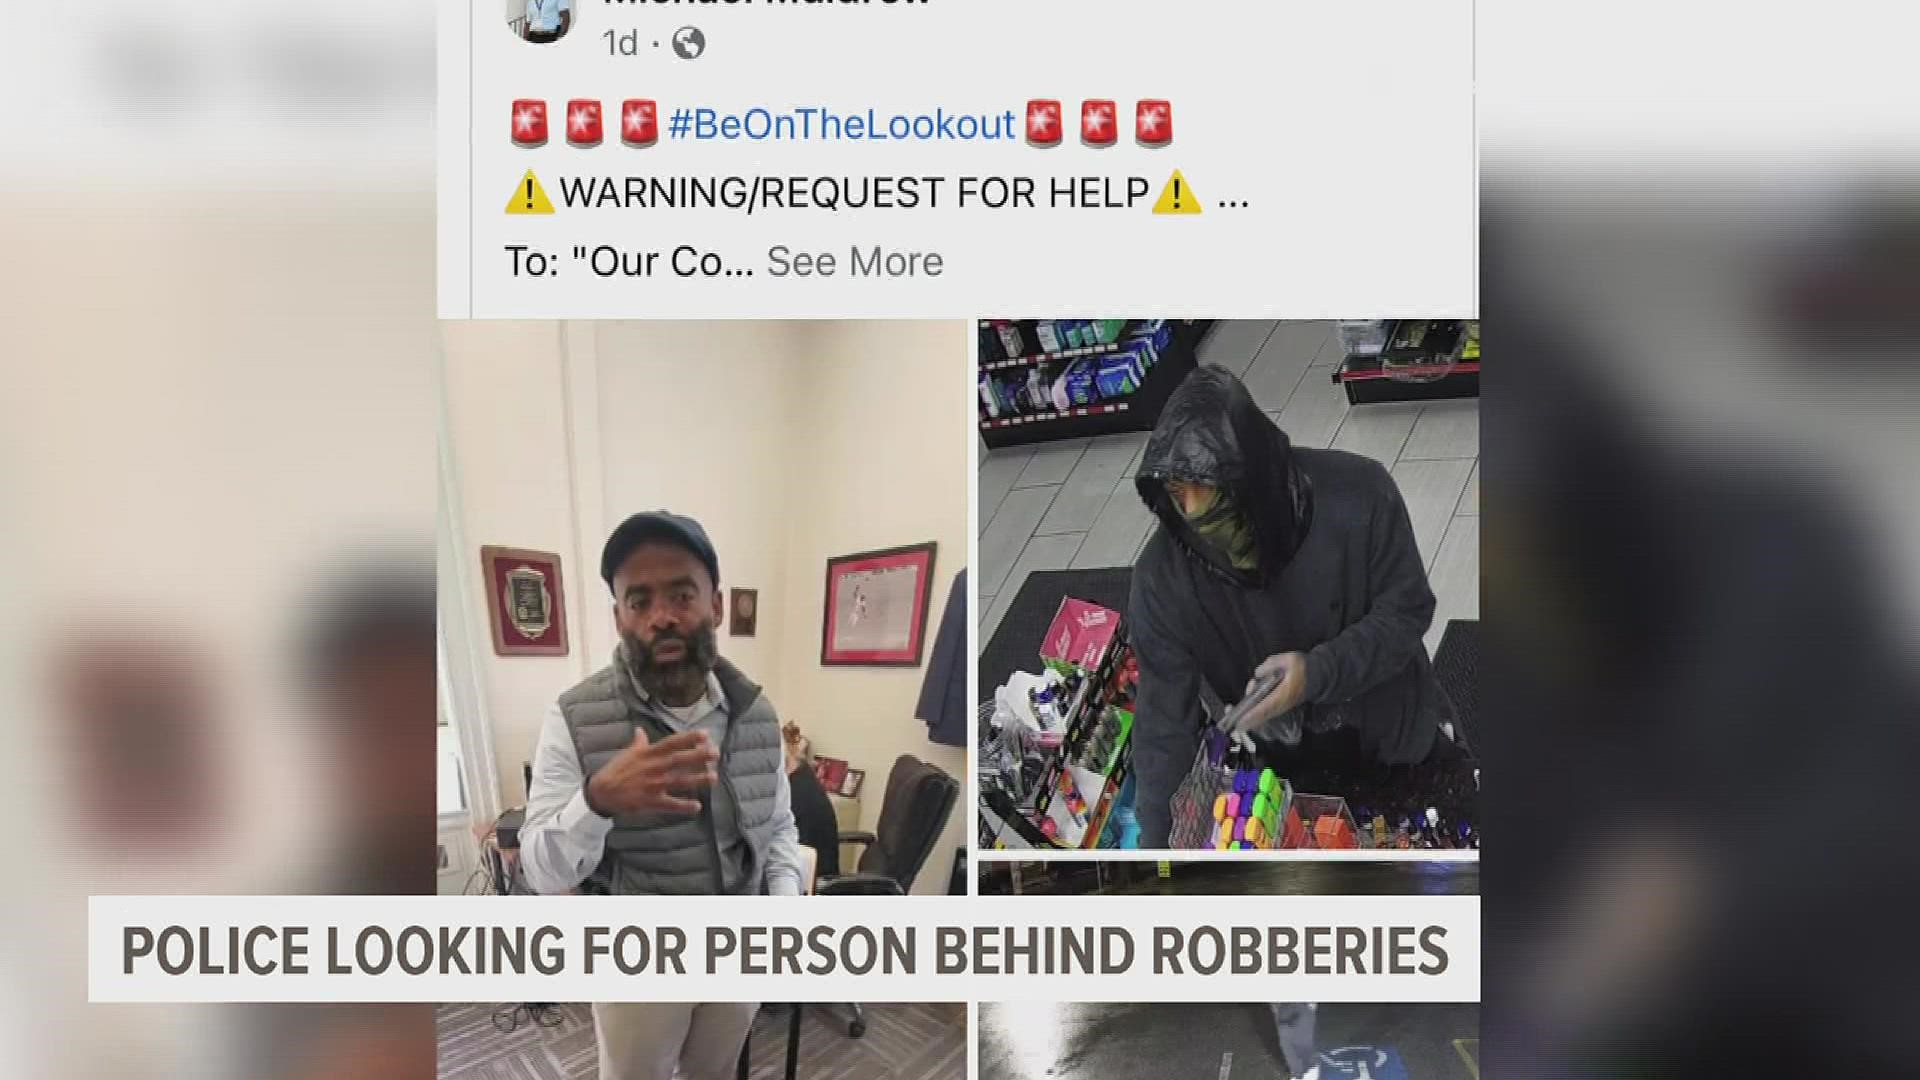 Cash has been the primary reason for these robberies.